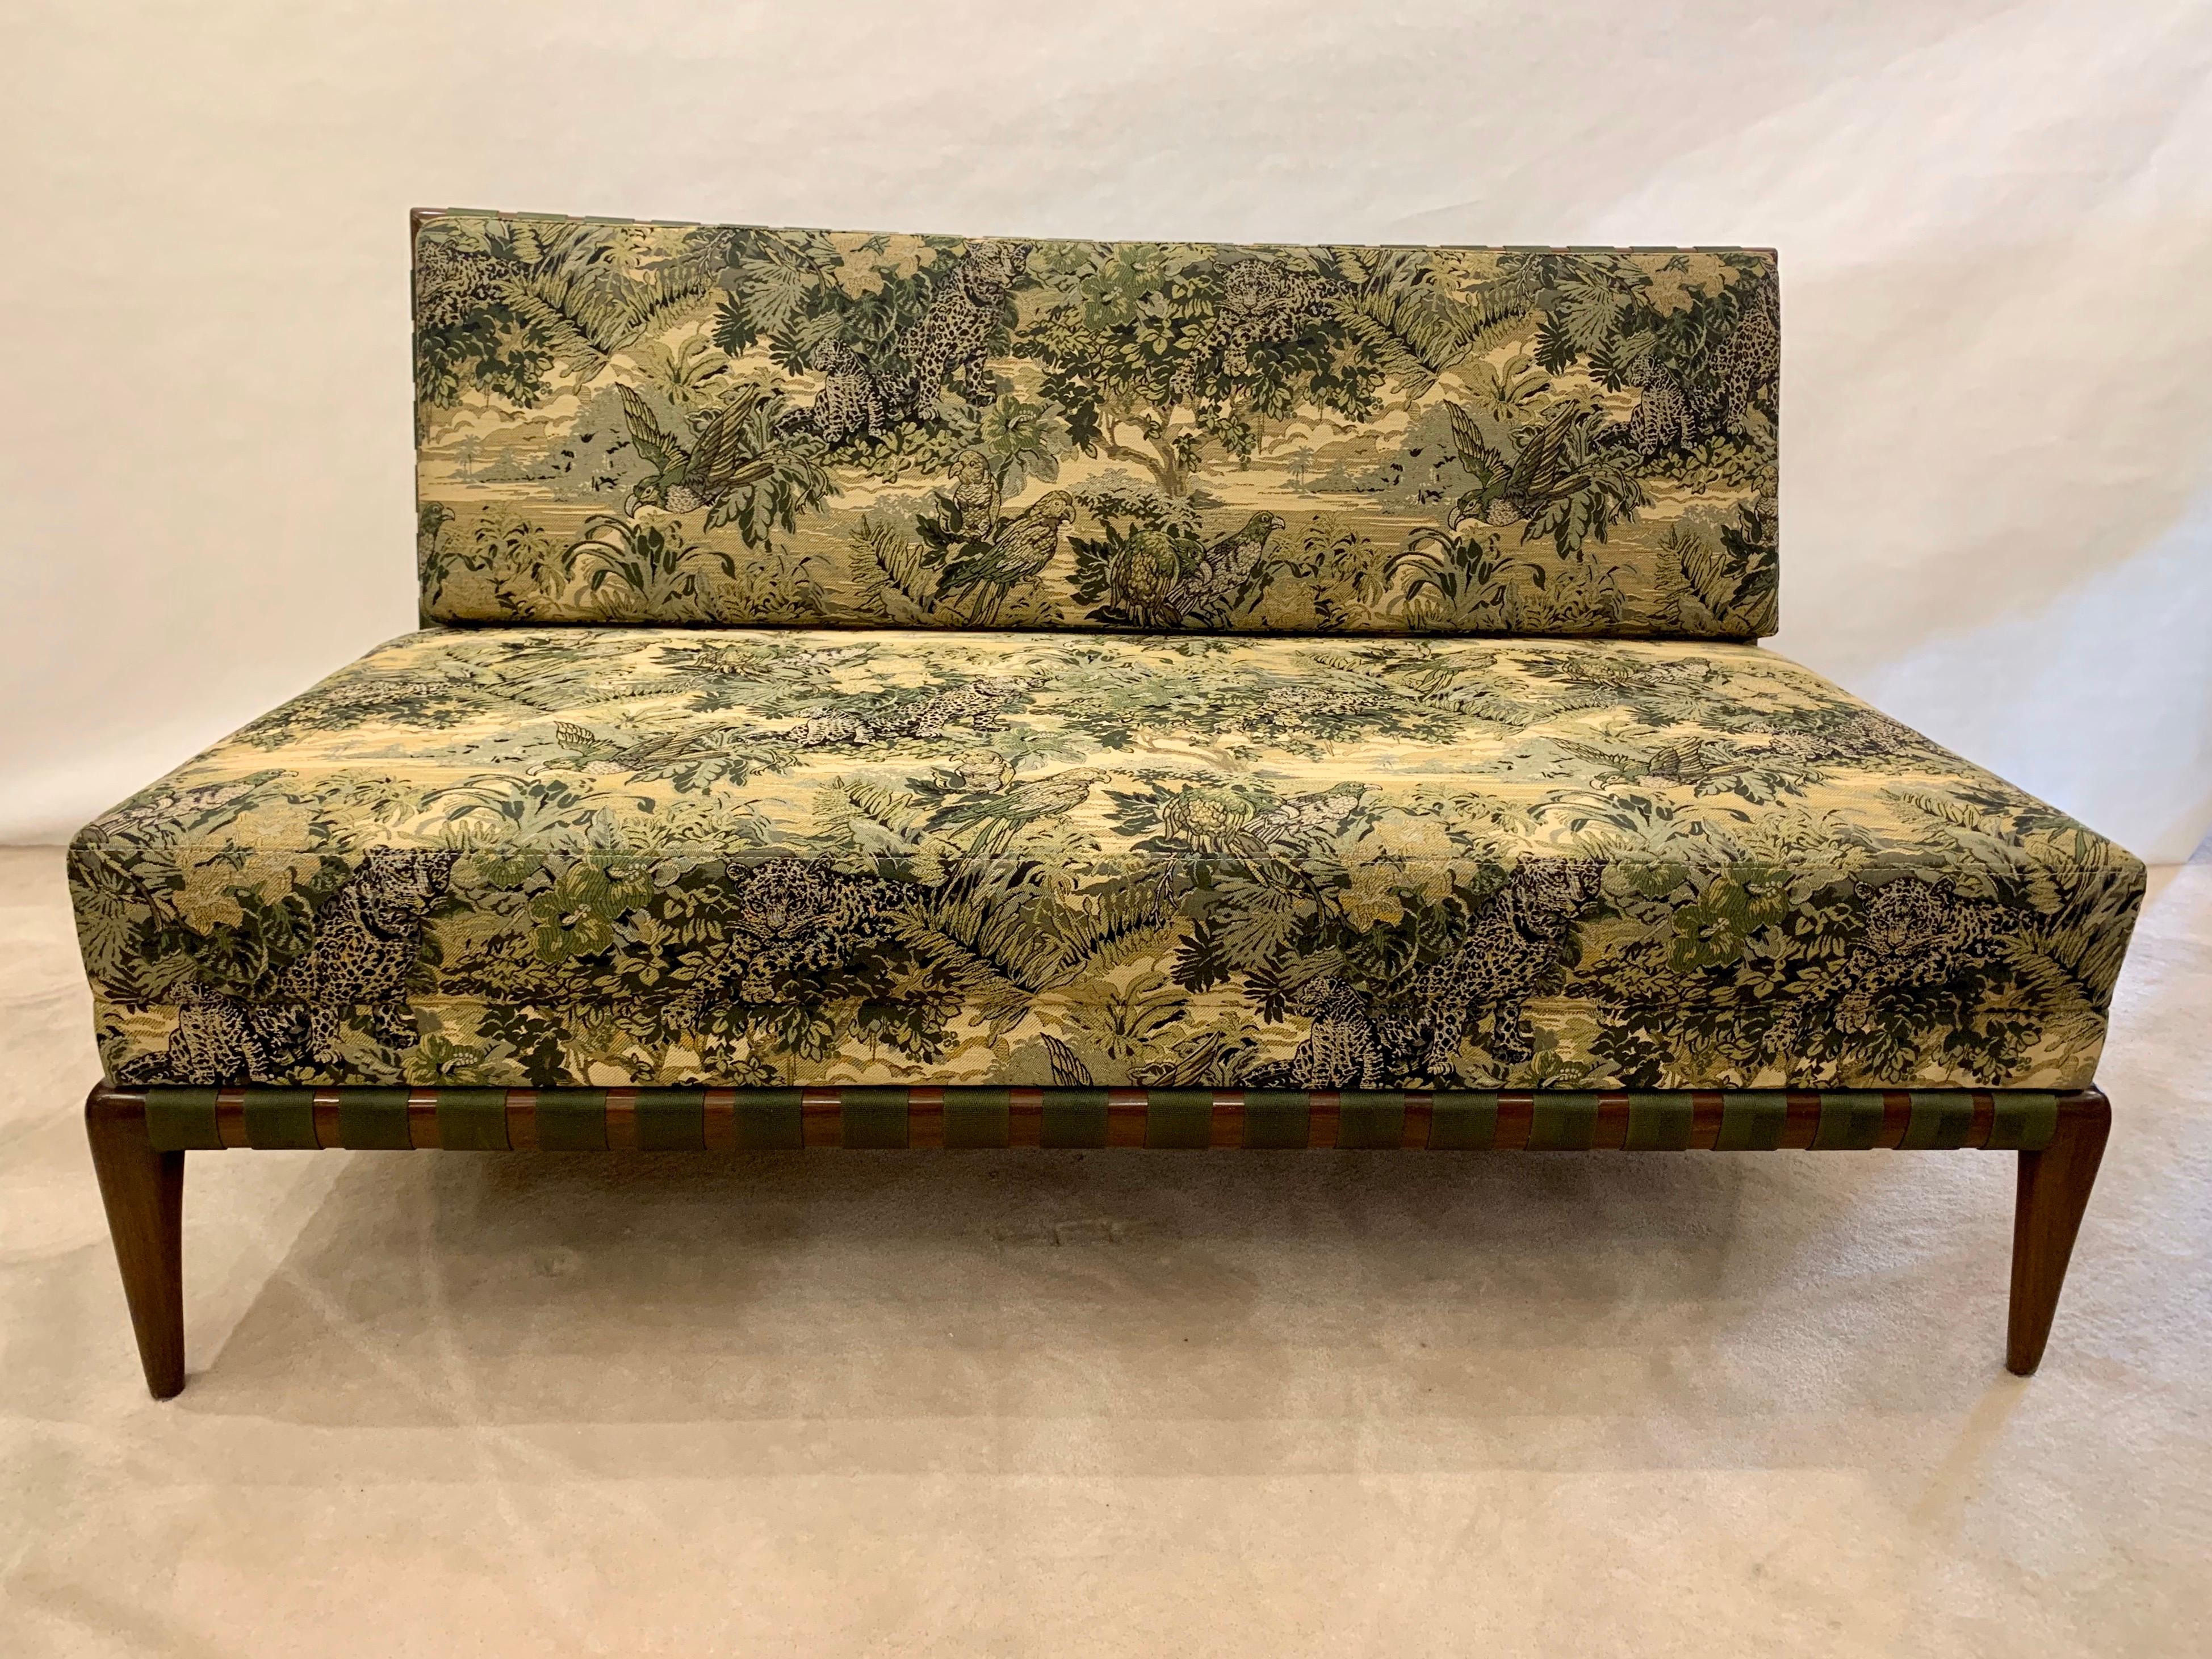 Solid walnut frame in an espresso finish and dark green woven strapping base and backing. The newly upholstered cushions are in a fabulous animal/ jungle print which is fun and subtle. This is a truly exceptional piece. Ready to place in your home!